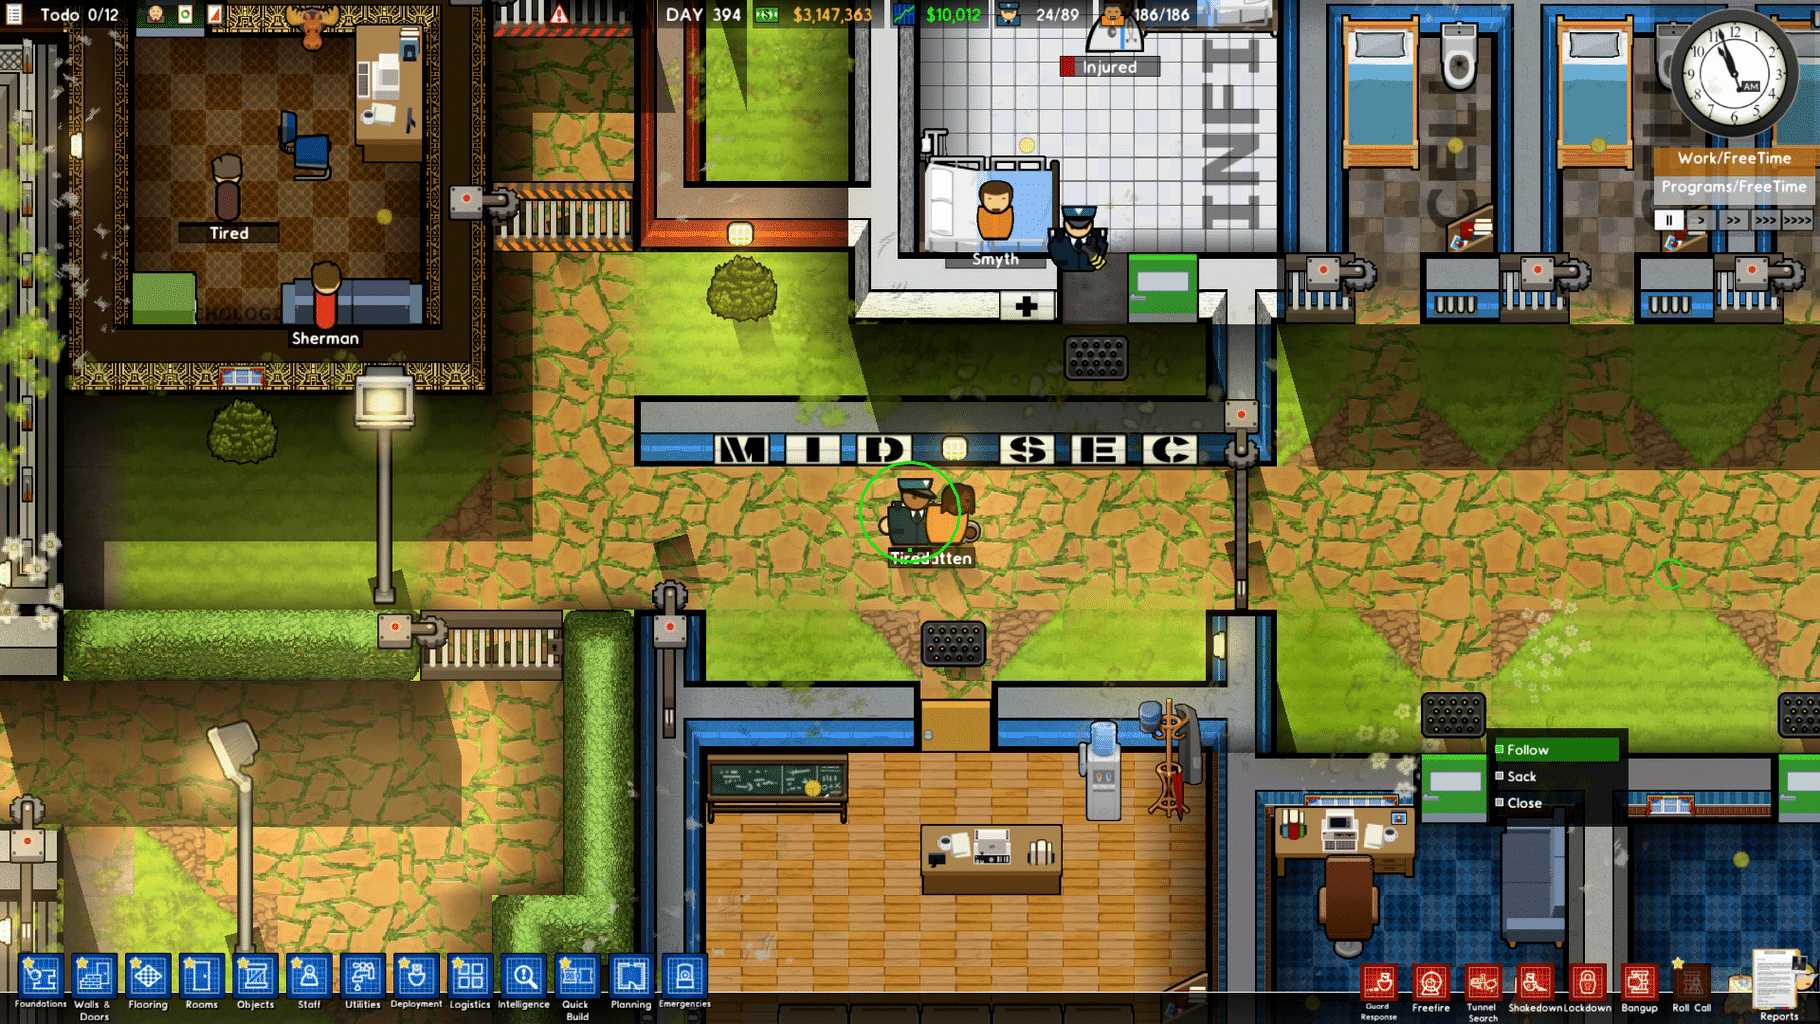 Prison Architect: Cleared for Transfer screenshot